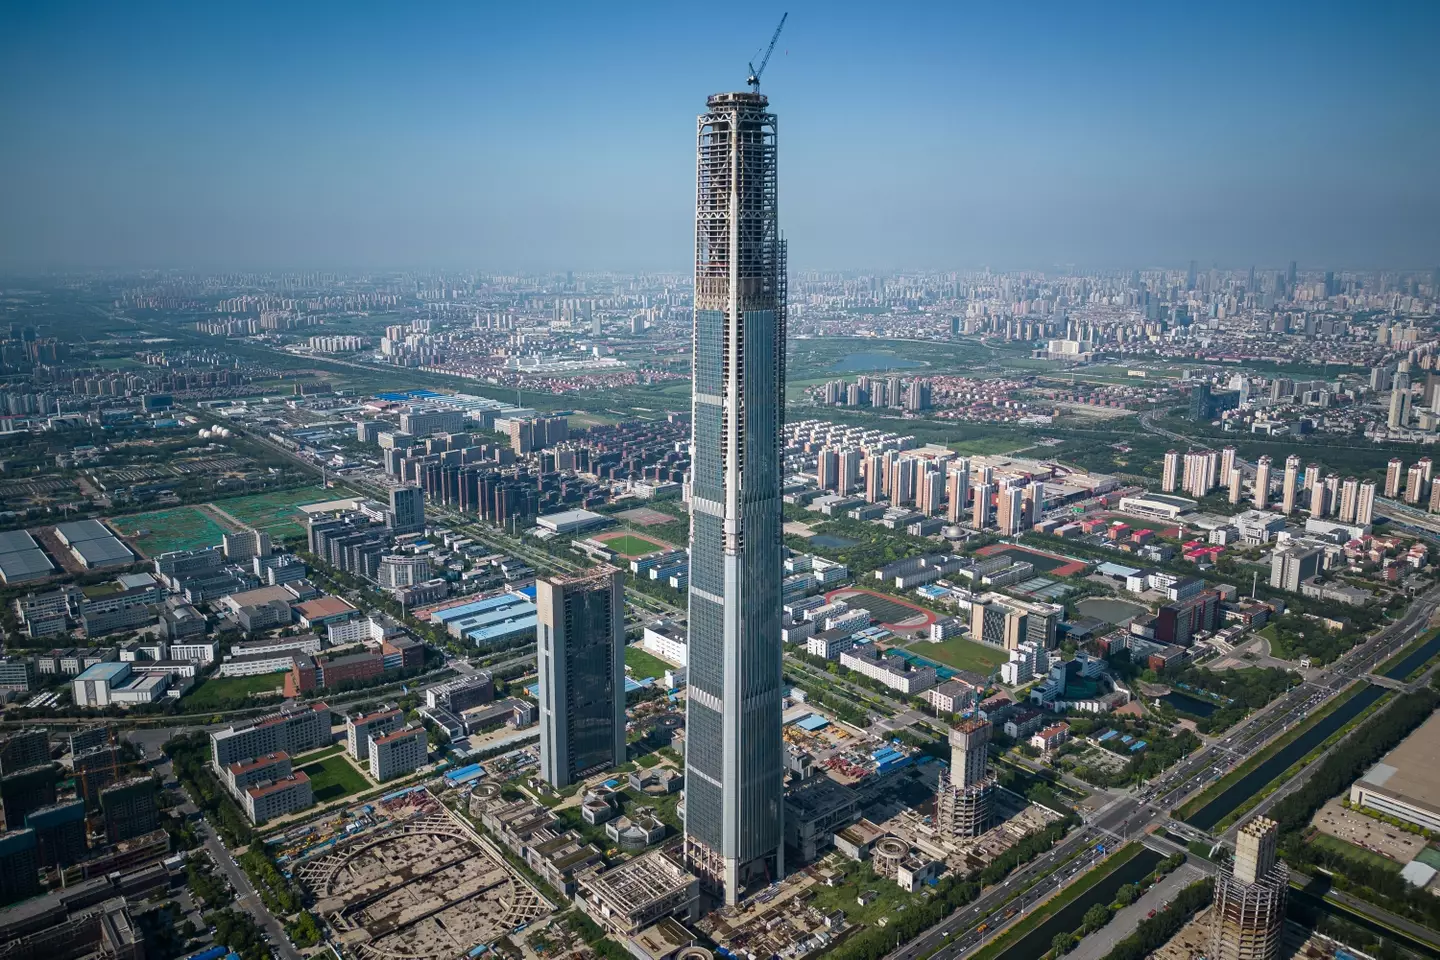 The construction of the massive structure in Xiqing District, Tianjin, China, commenced in 2008.